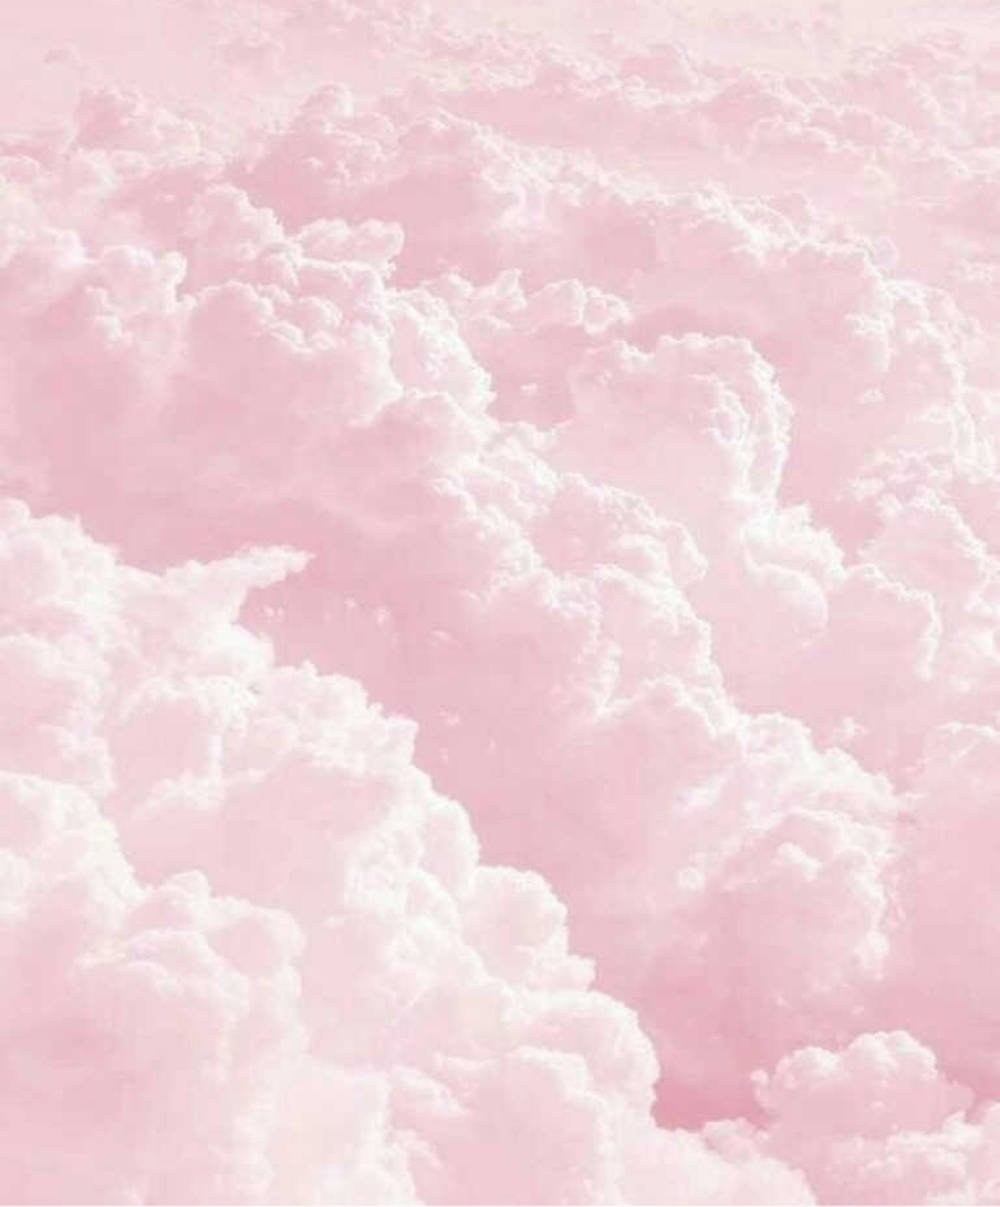 Dreamy Pastel Ipad Wallpaper With Thick Pink Clouds Wallpaper